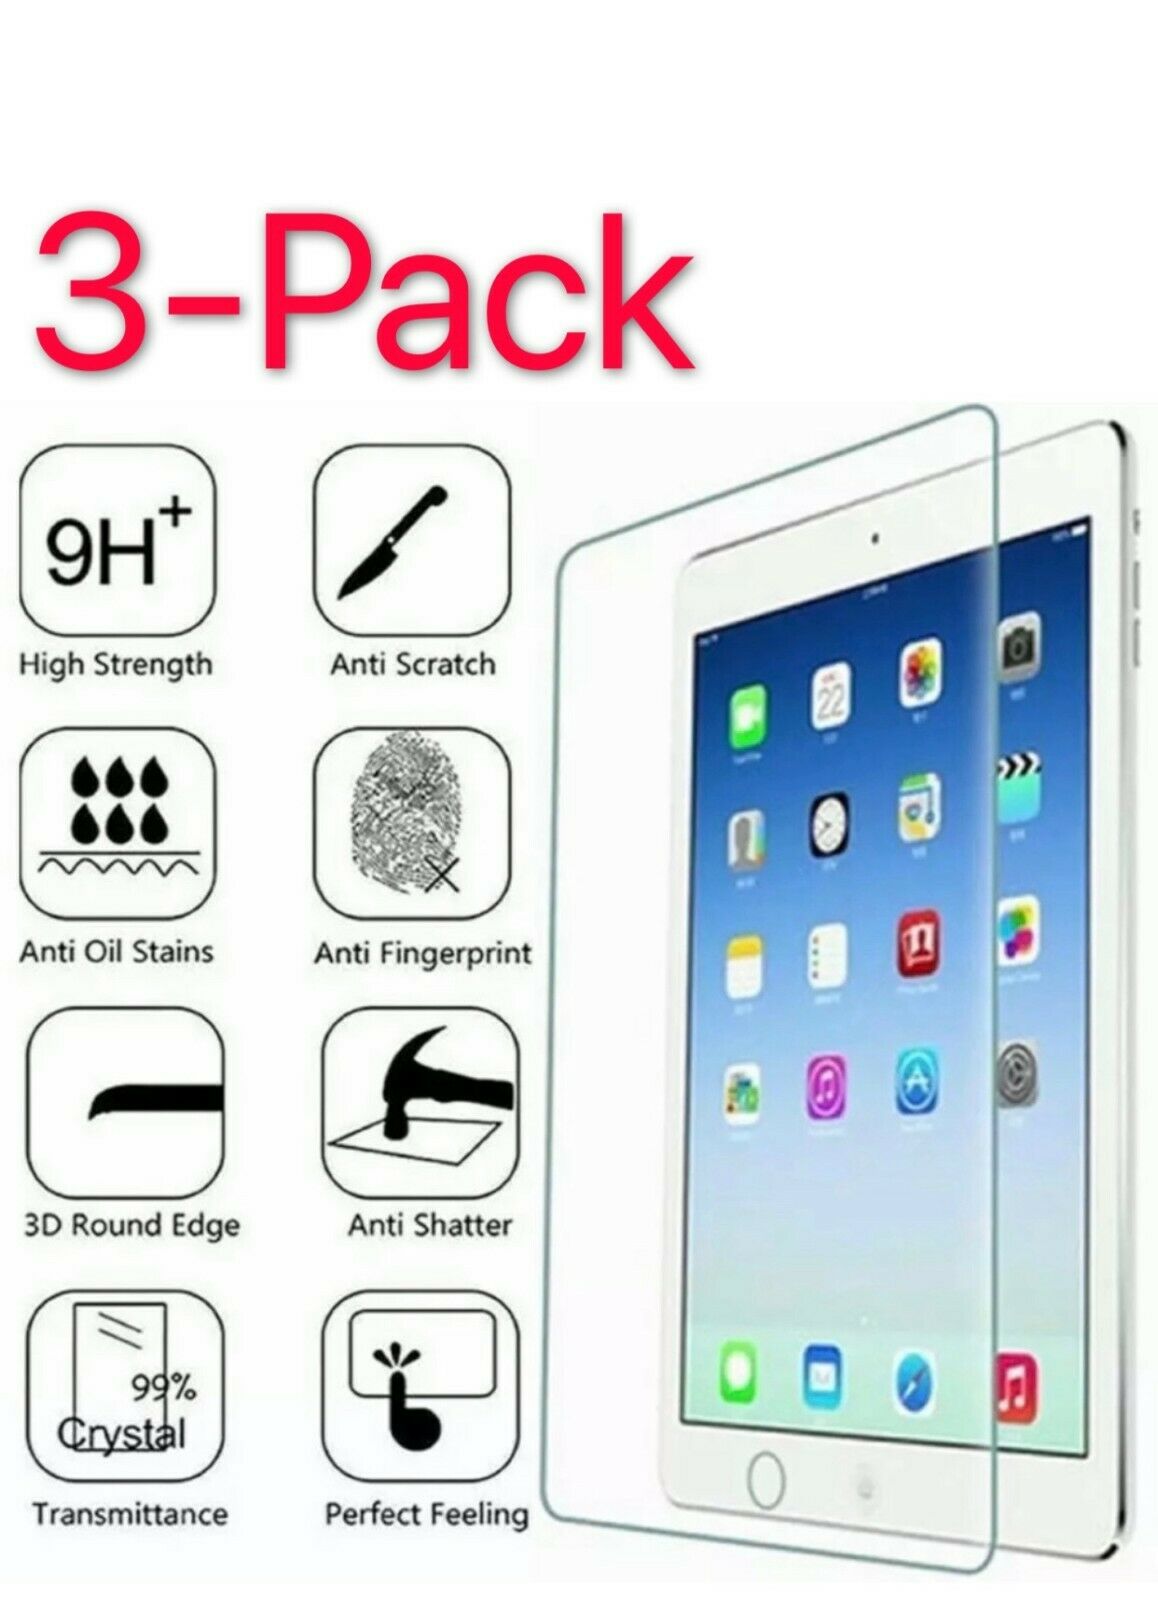 3-pack Tempered Glass Screen Protector For Ipad 2 3 4 Air Pro 9.7"10.2‘10.5" 11"